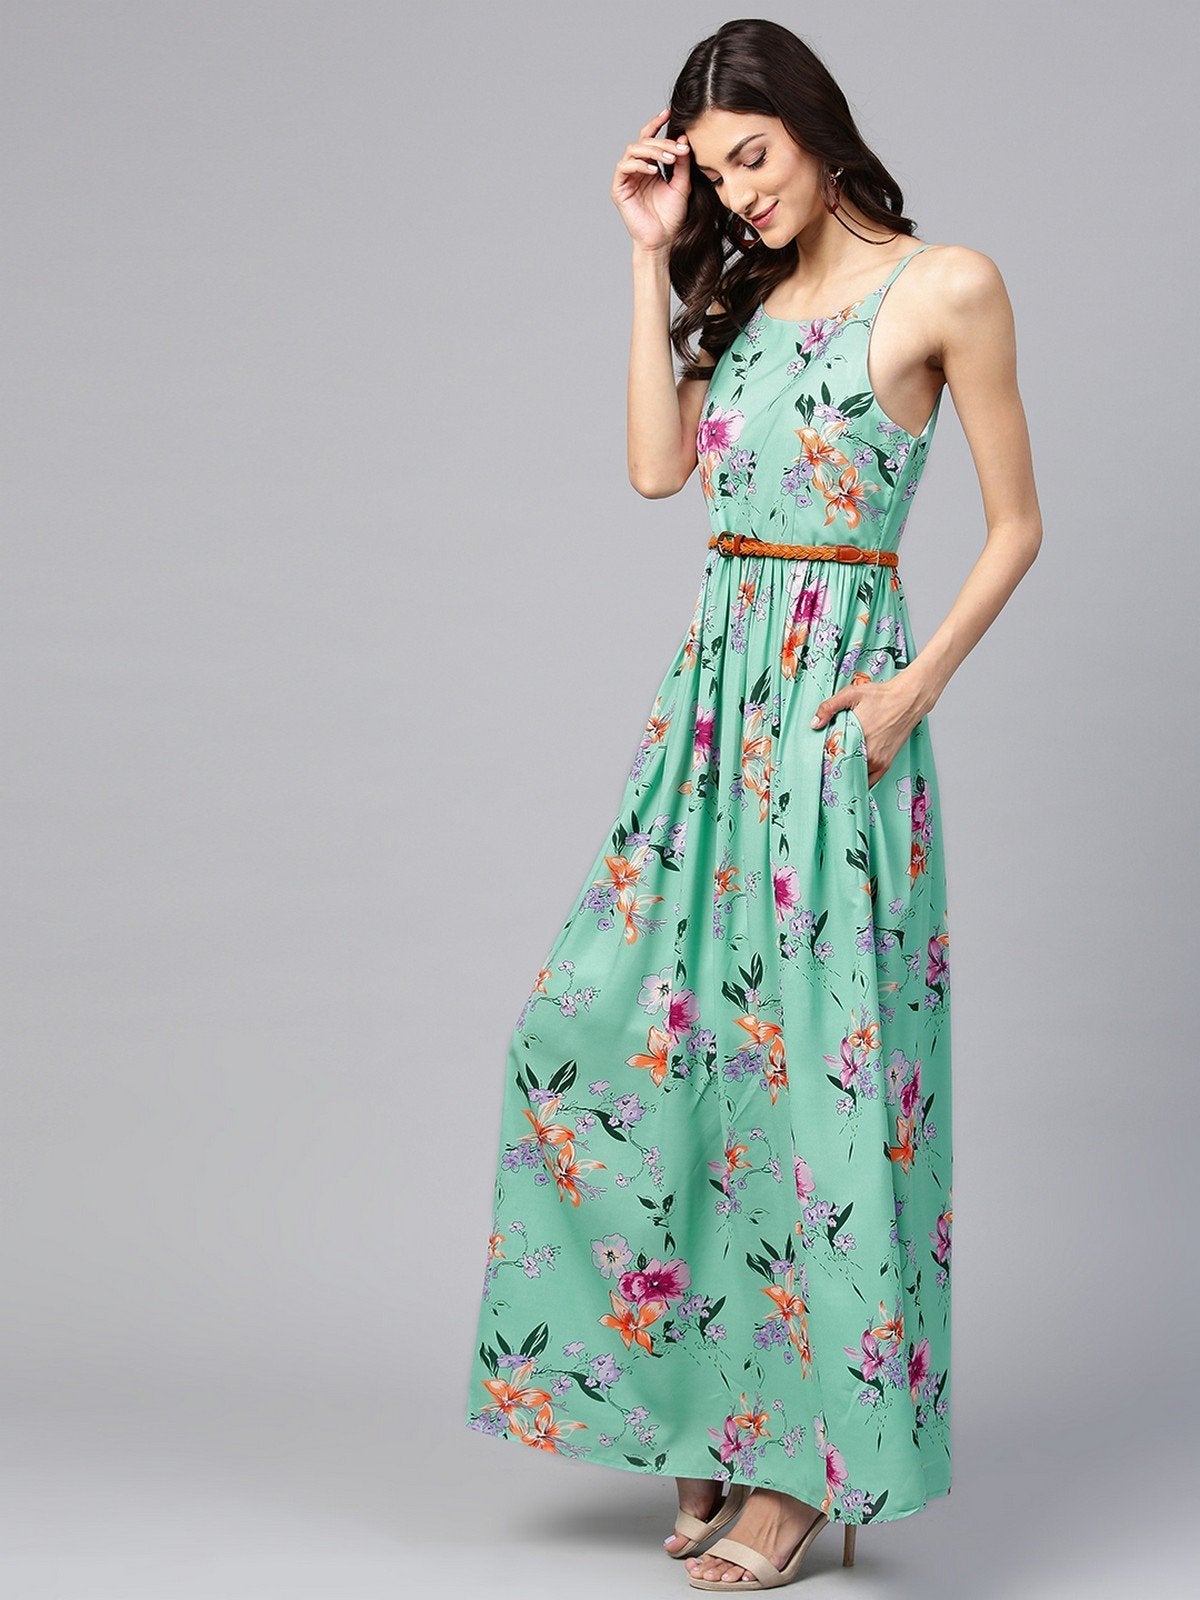 Women's Floral Strappy Maxi Dress - Pannkh